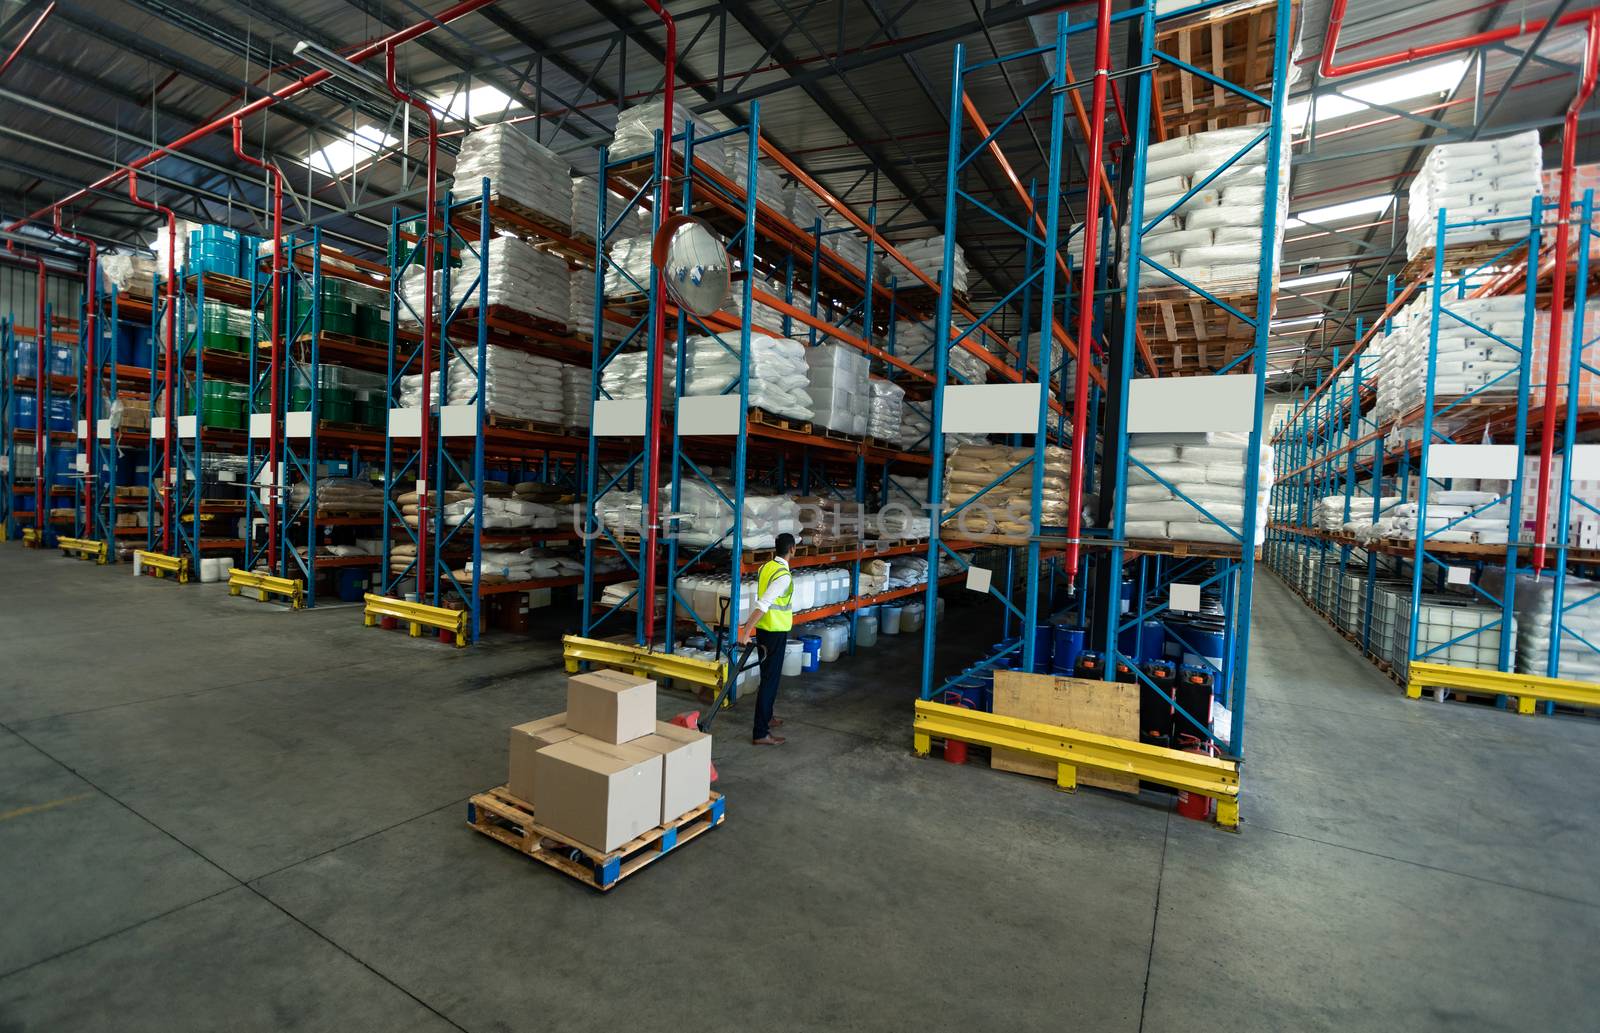 Rear view of Young Caucasian male staff using pallet jack in warehouse. This is a freight transportation and distribution warehouse. Industrial and industrial workers concept